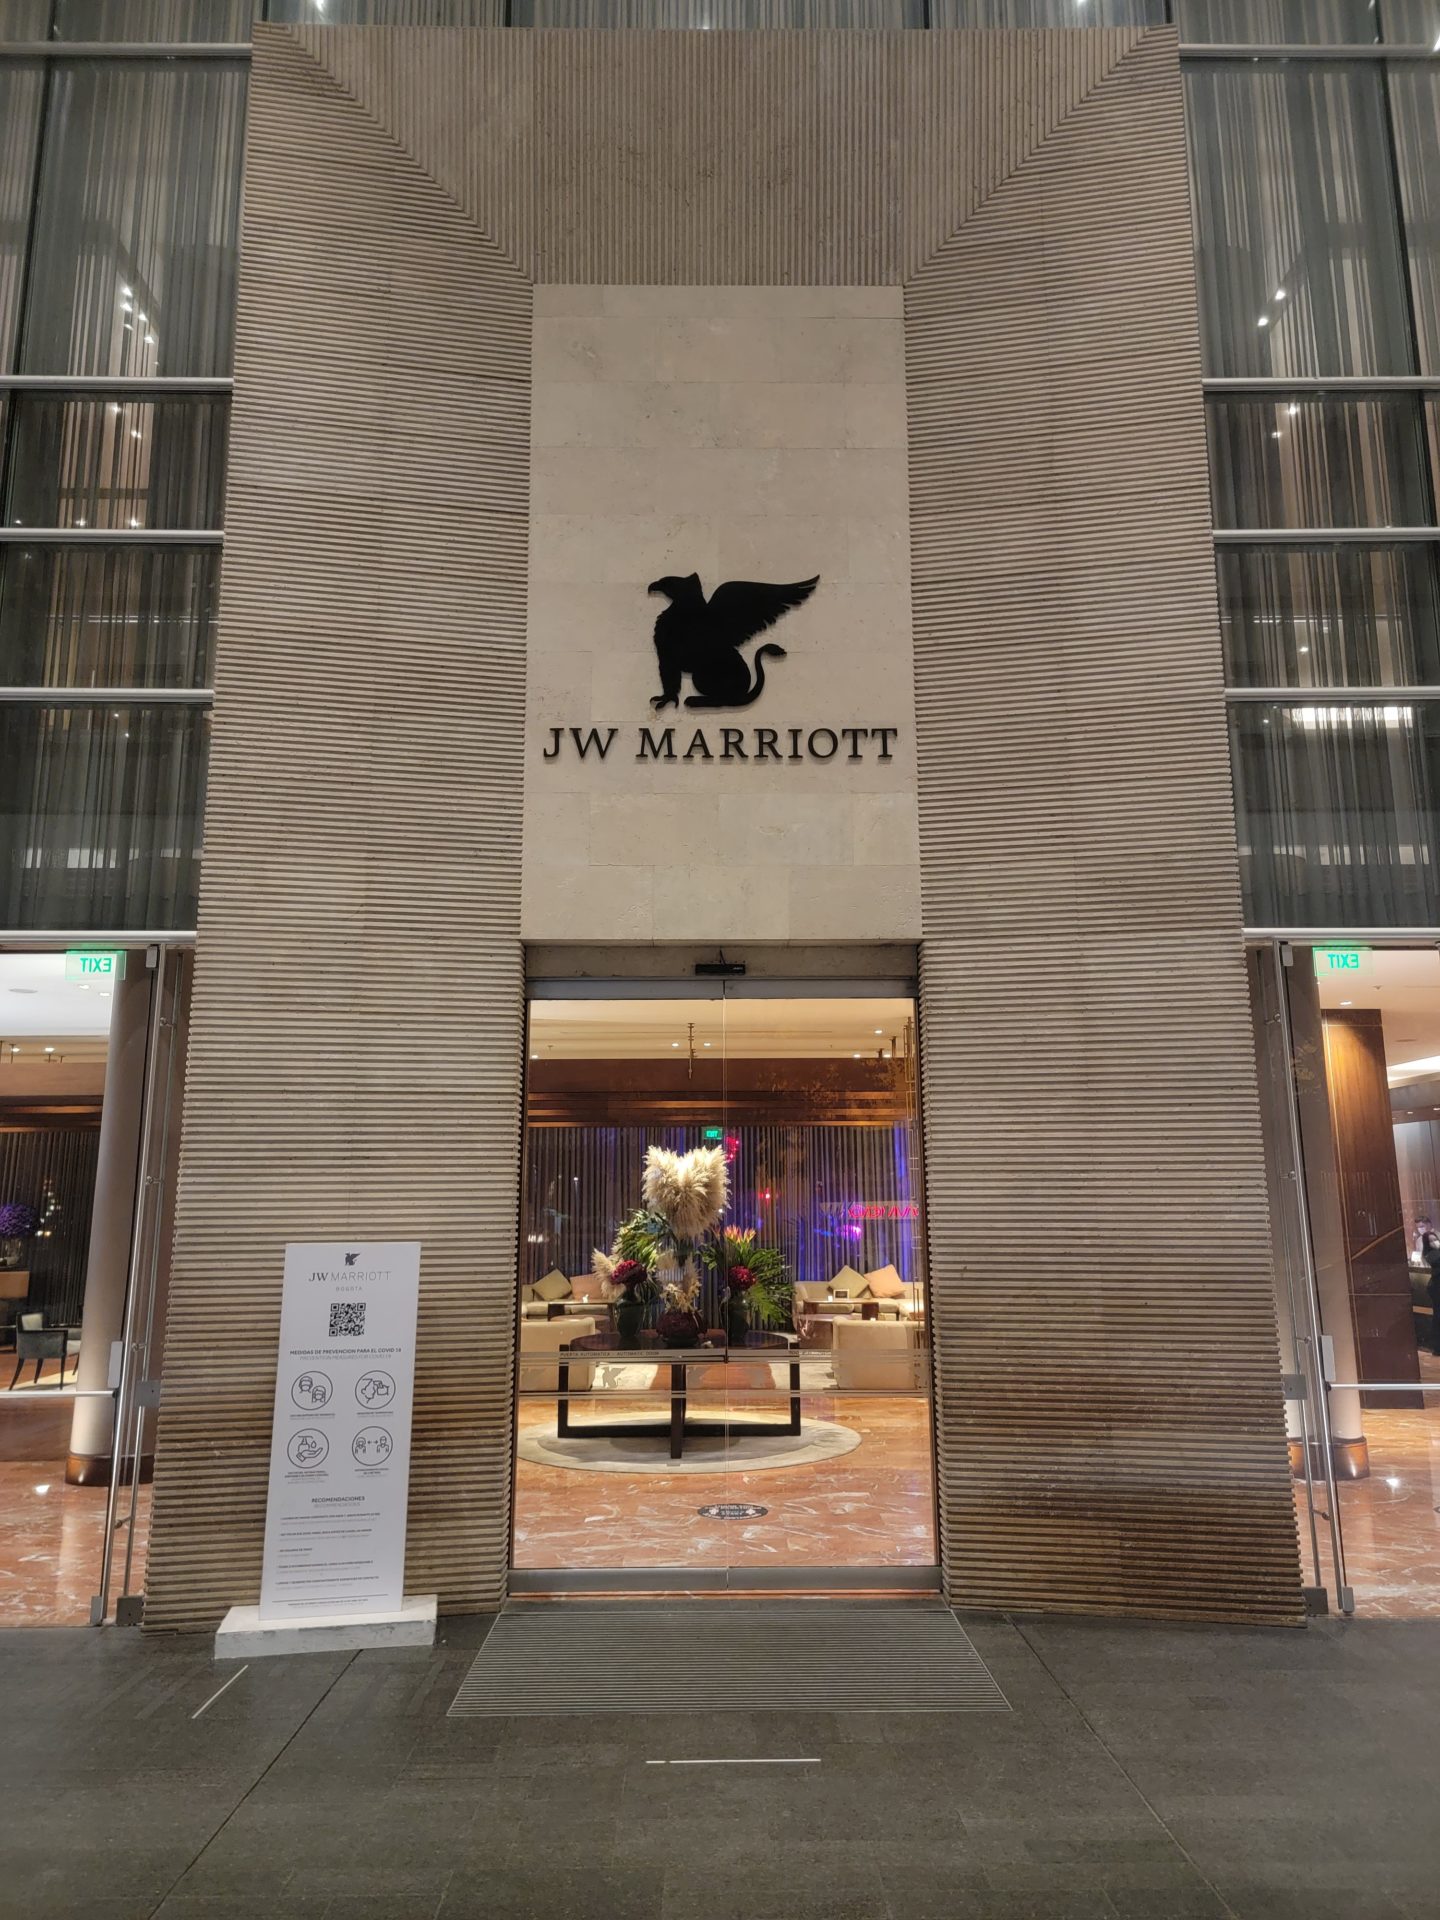 JW Marriott Bogota: My Father Would Stay Here